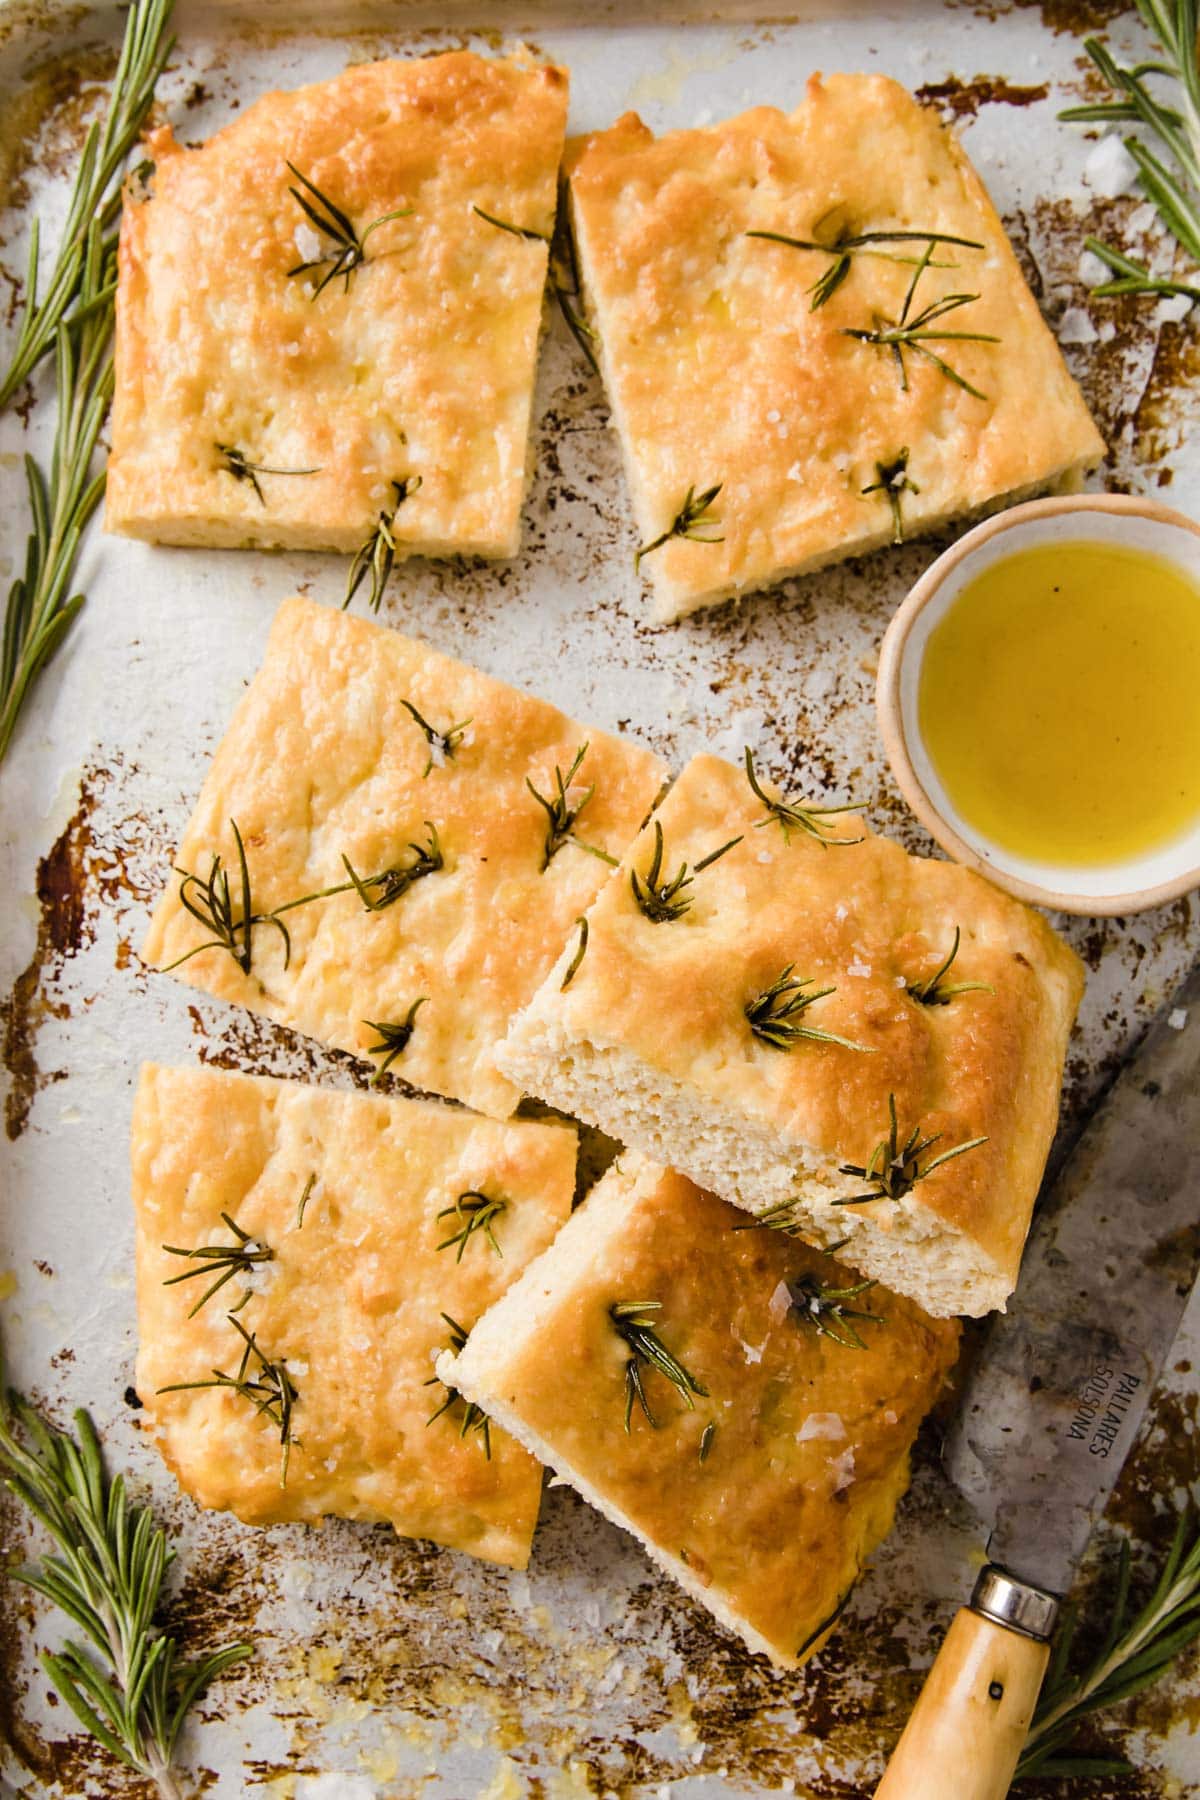 Squares of focaccia bread on a baking sheet decorated with fresh rosemary sprigs and a bowl of olive oil